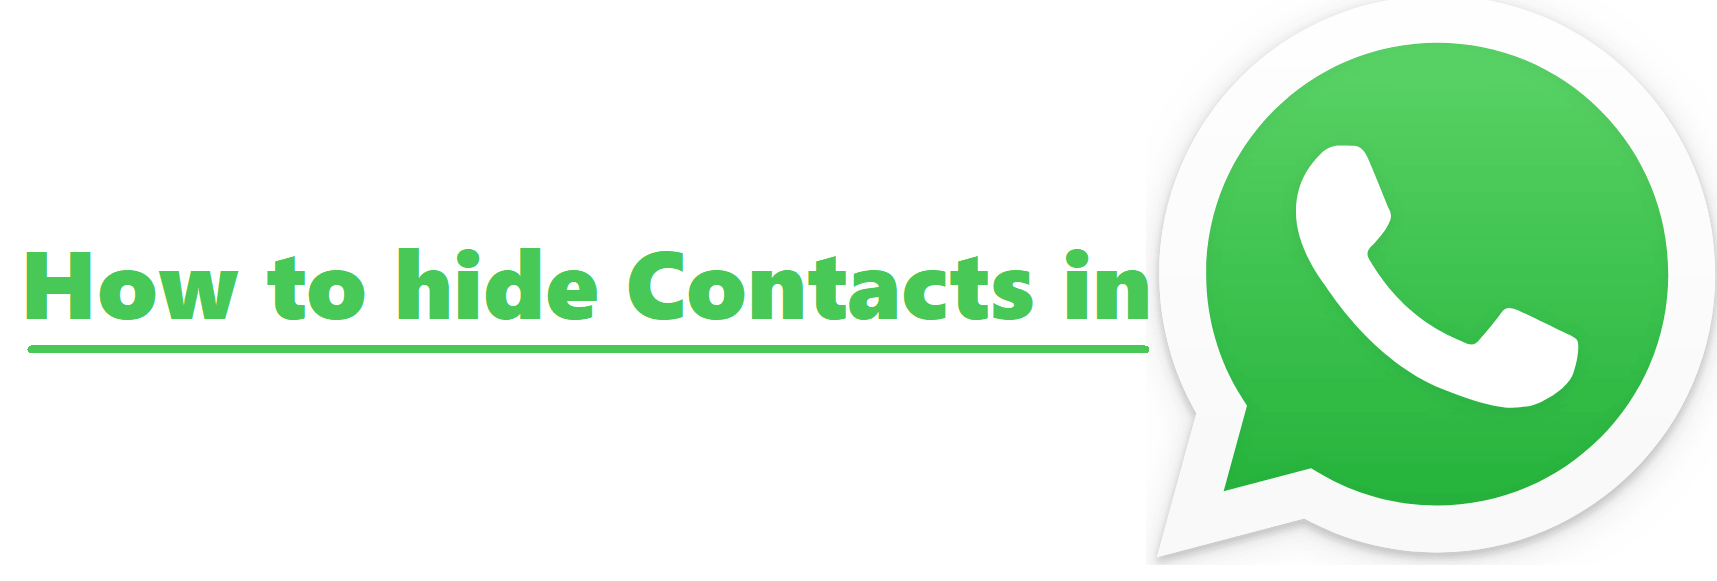 How to hide contact in WhatsApp – 2 Easy Ways